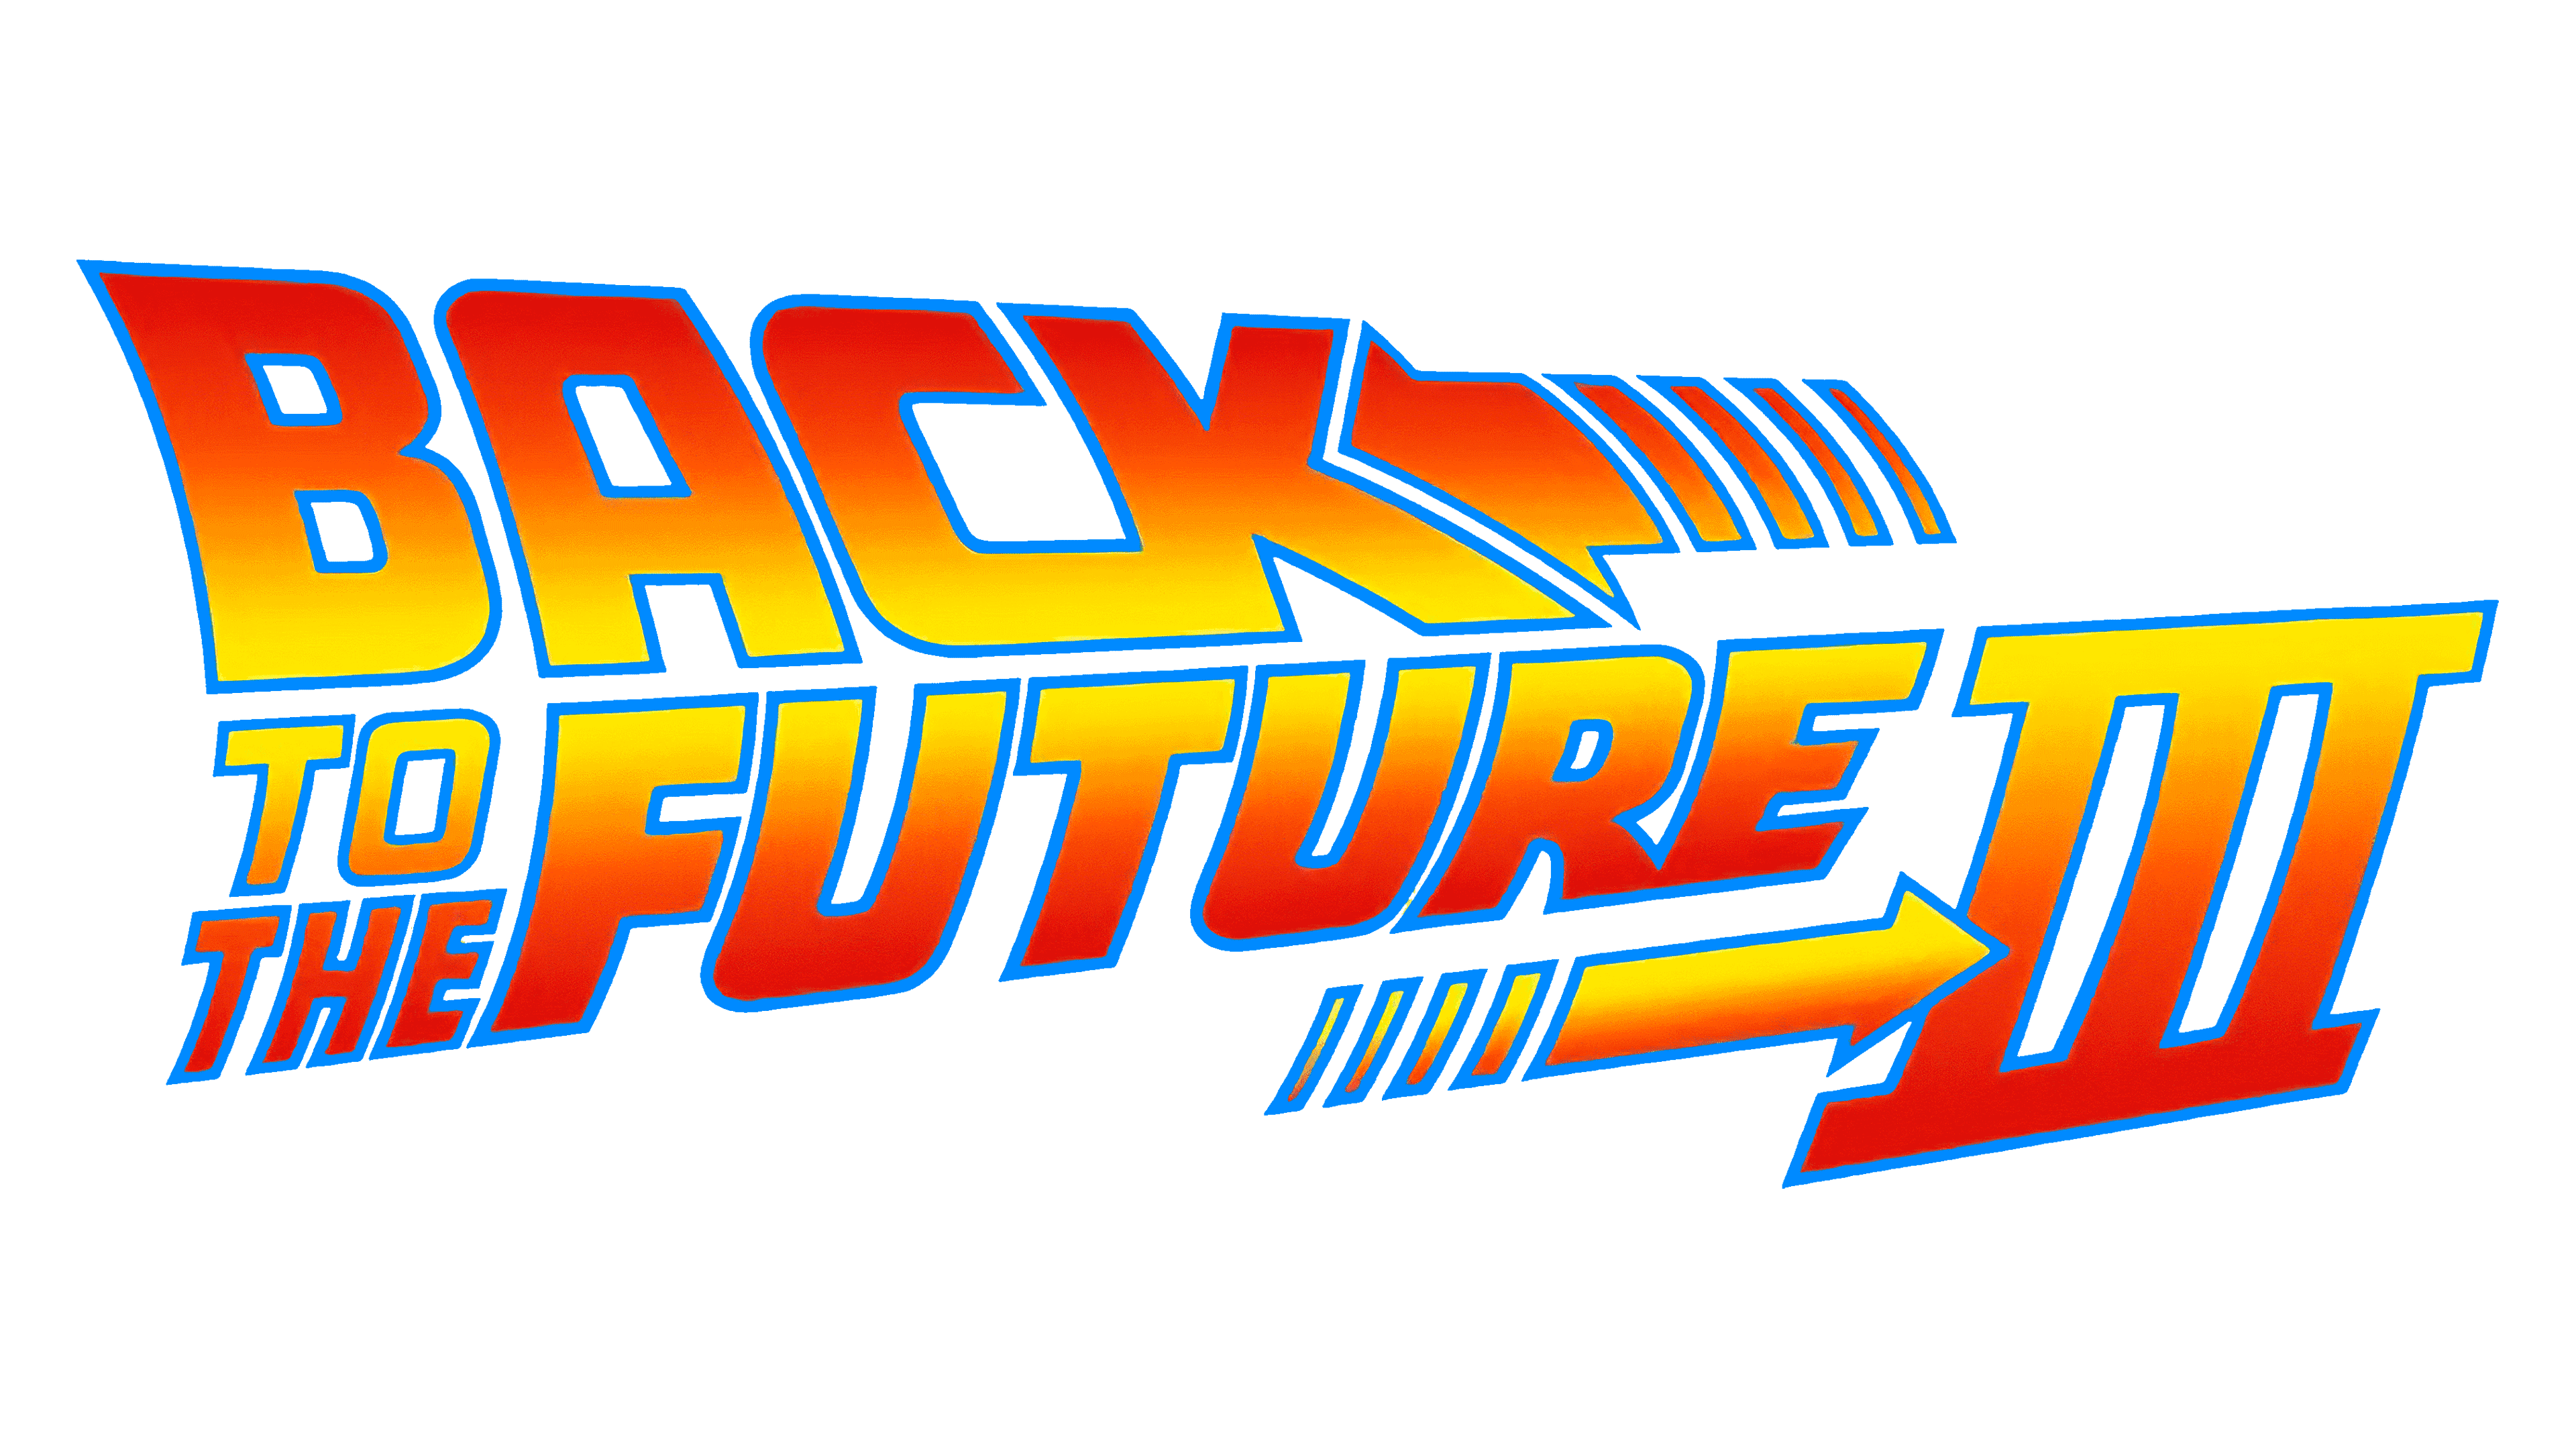 Back To The Future Logo And Symbol Meaning History Png Brand